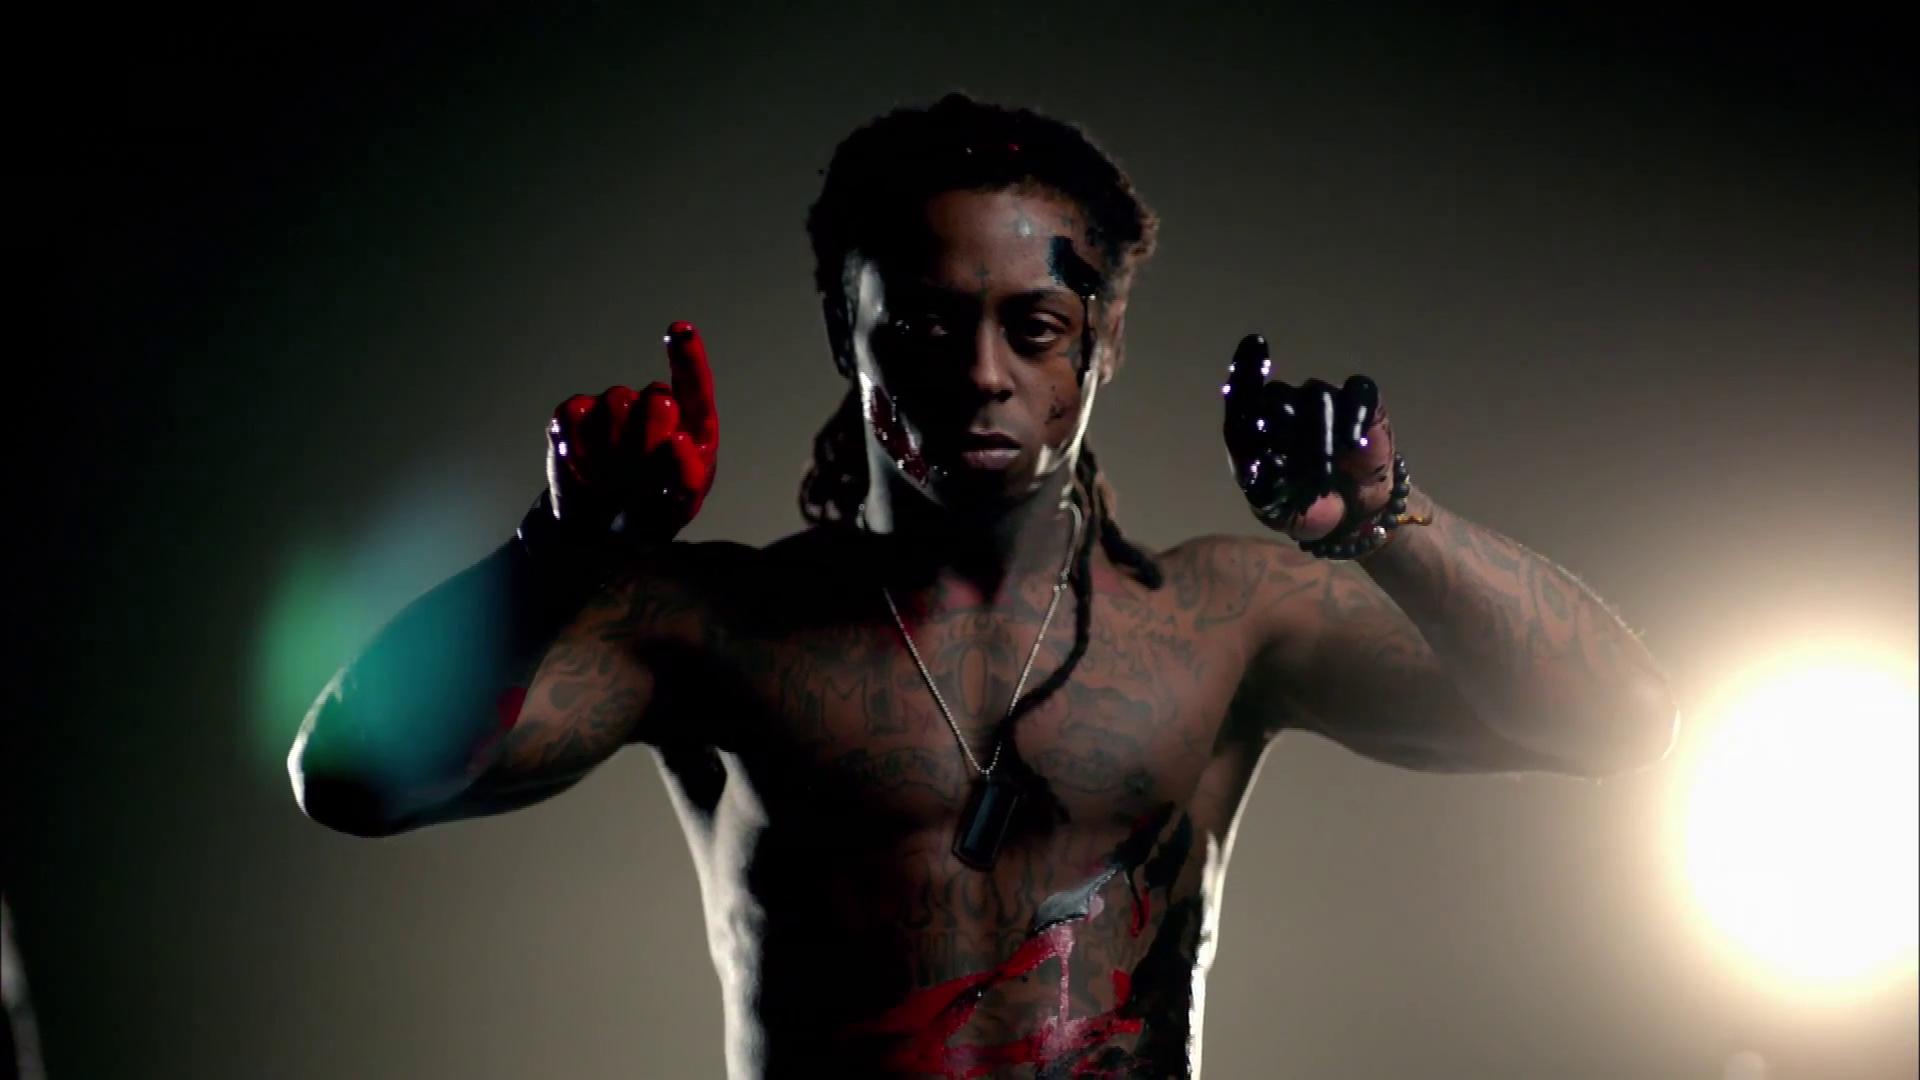 Lil Wayne Some New HD Wallpapers(High Defination) - All HD Wallpapers